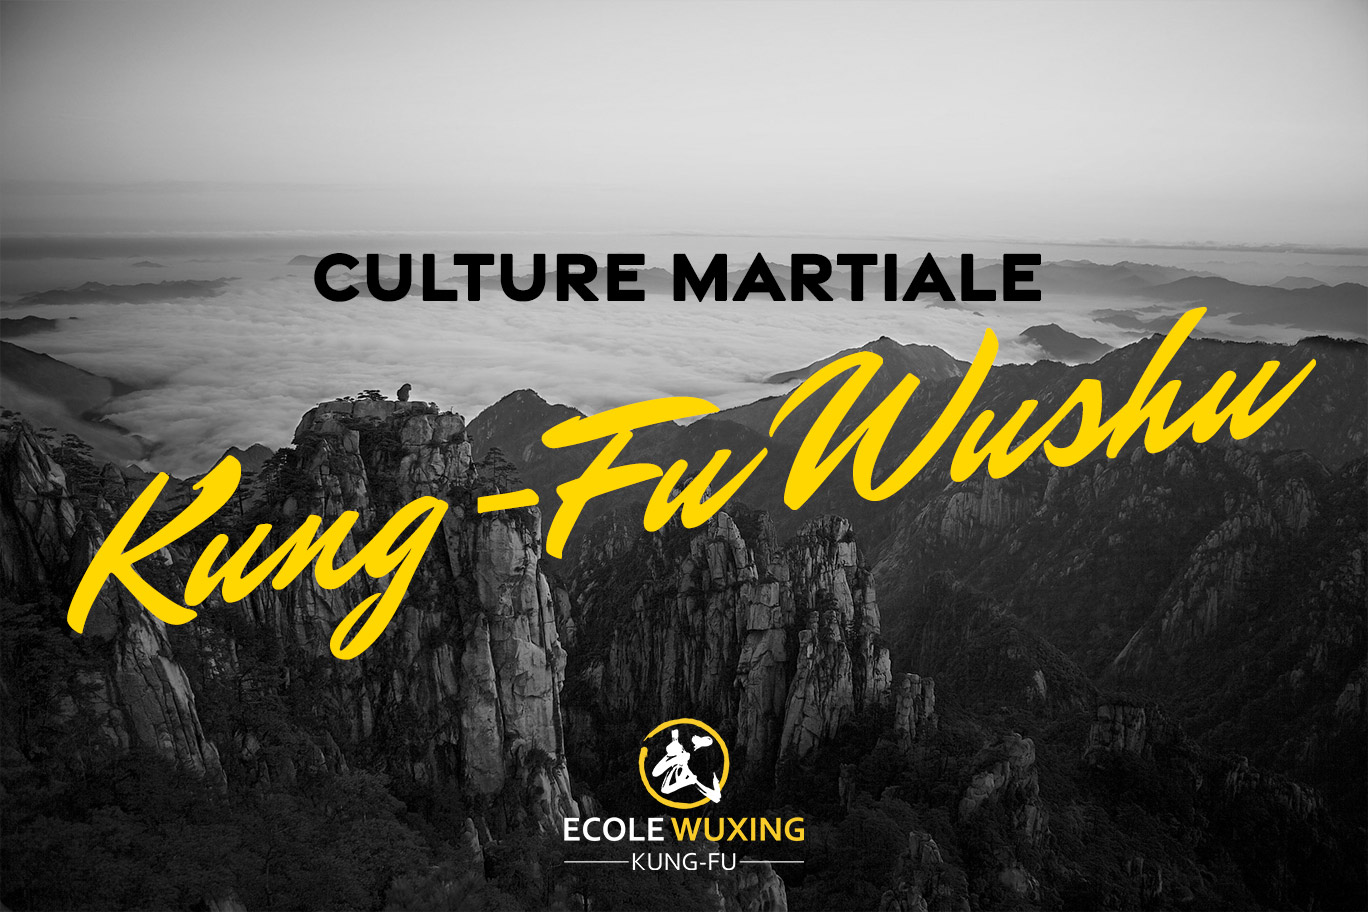 article culture martiale Explication arts martiaux chinois tradition Ecole Wuxing kung-fu wushu